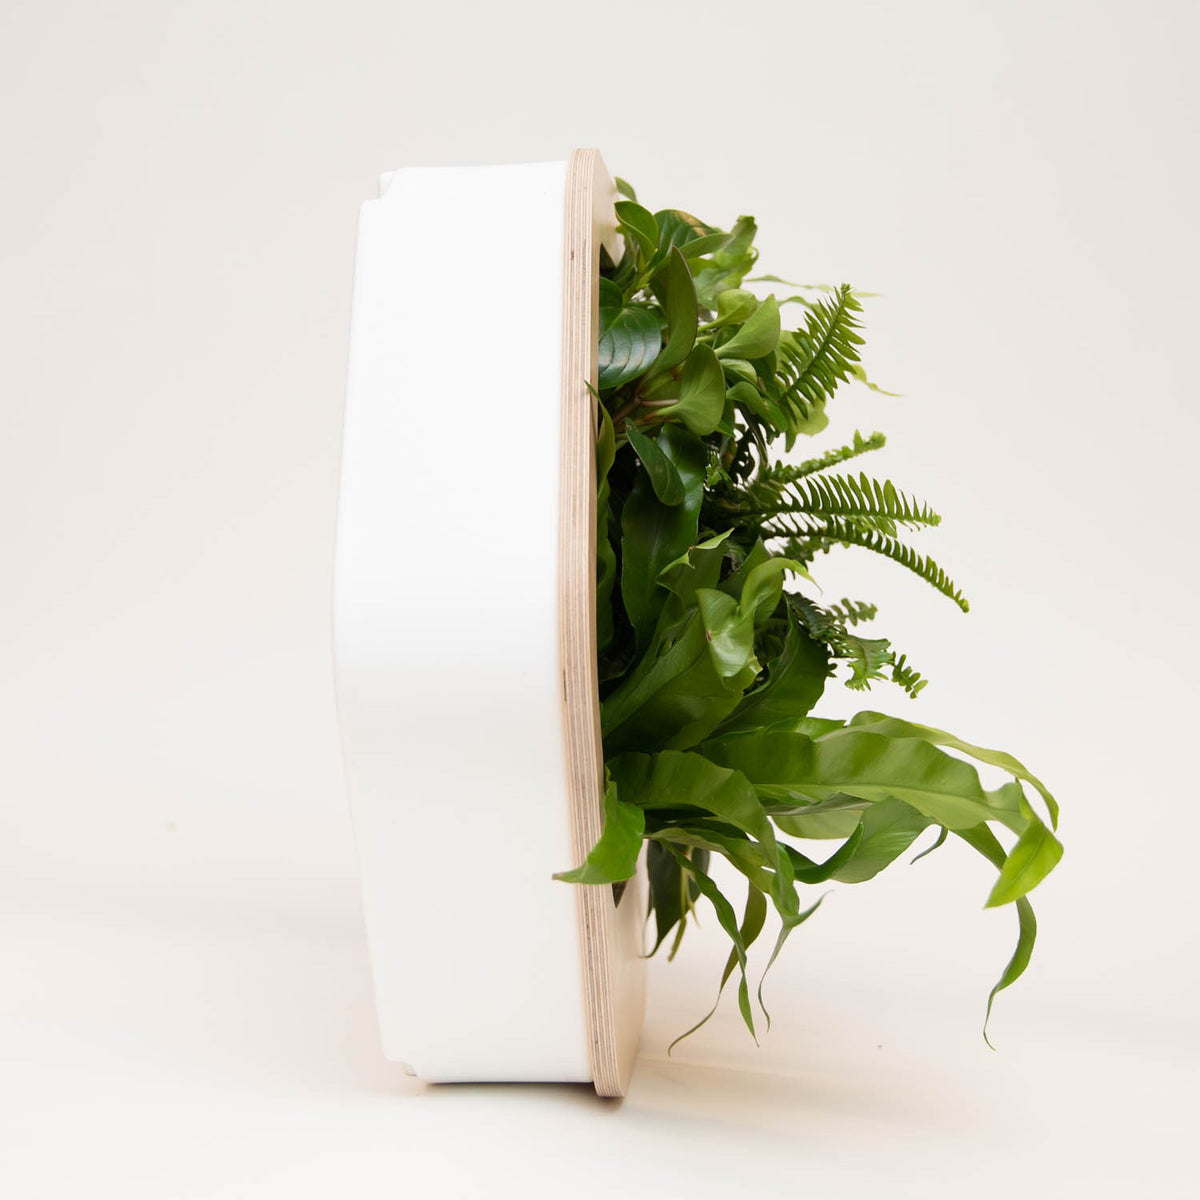 Mini Growmeo x SFMOMA Living Wall assortment, wood frame and lively plants, side.